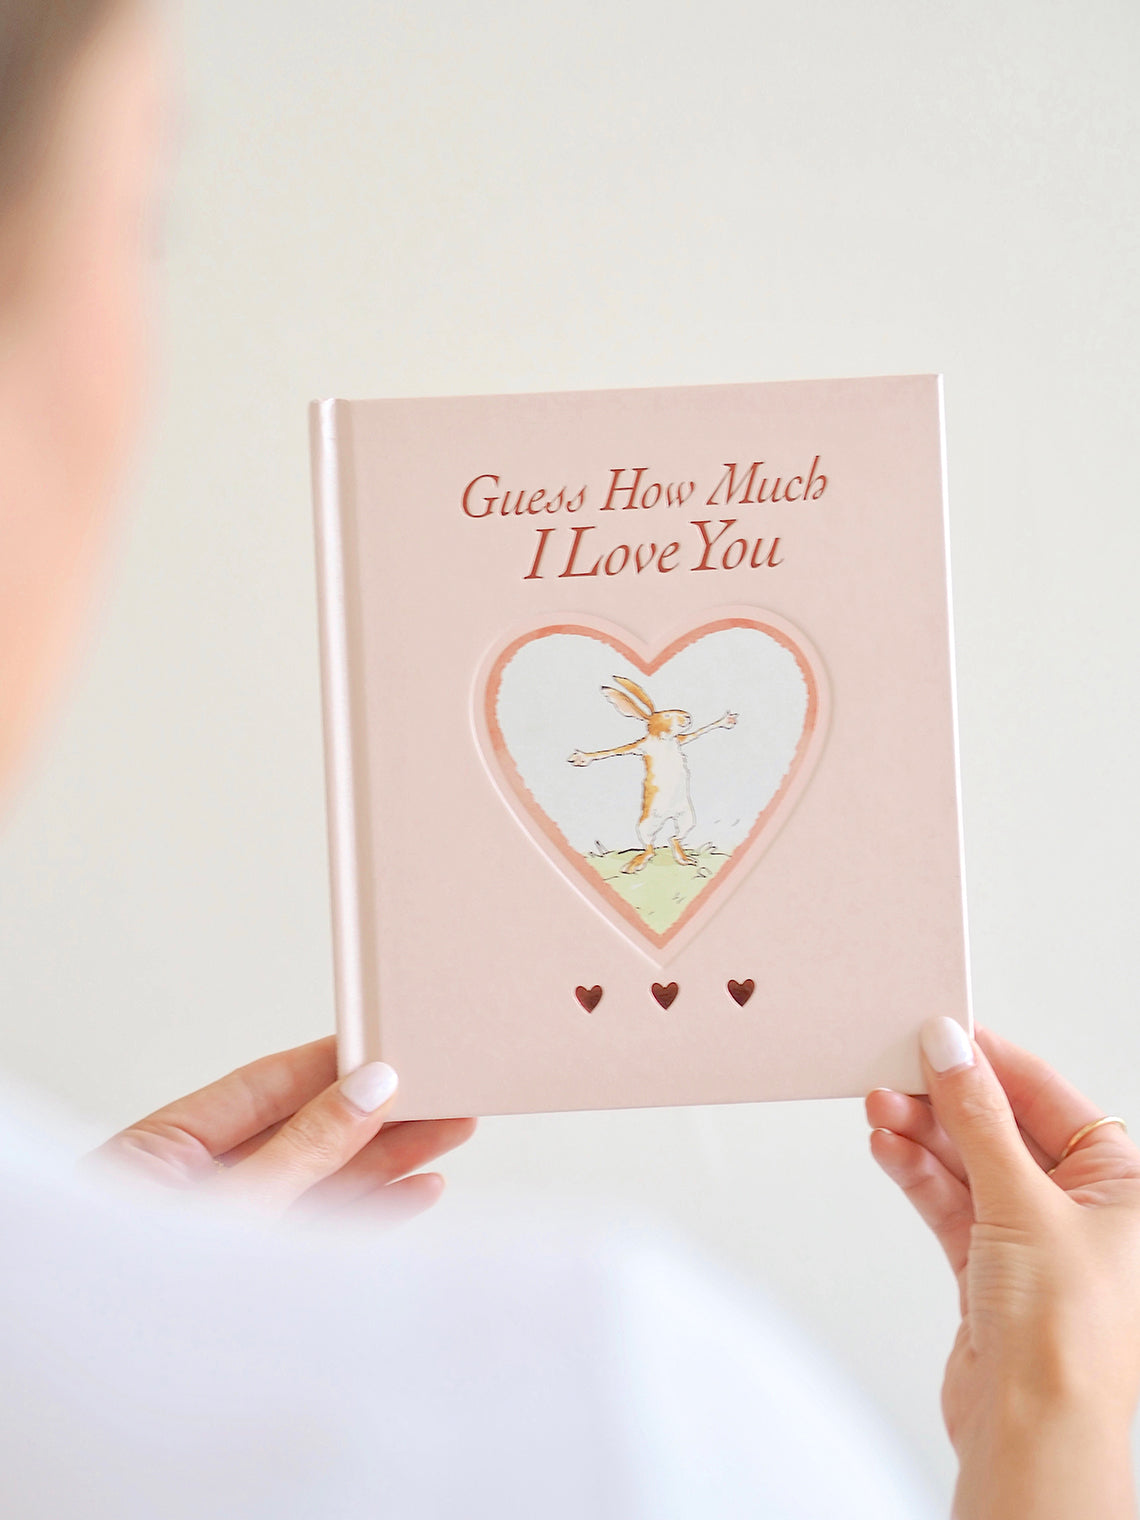 Guess How Much I Love You: Blush Sweetheart Edition Book